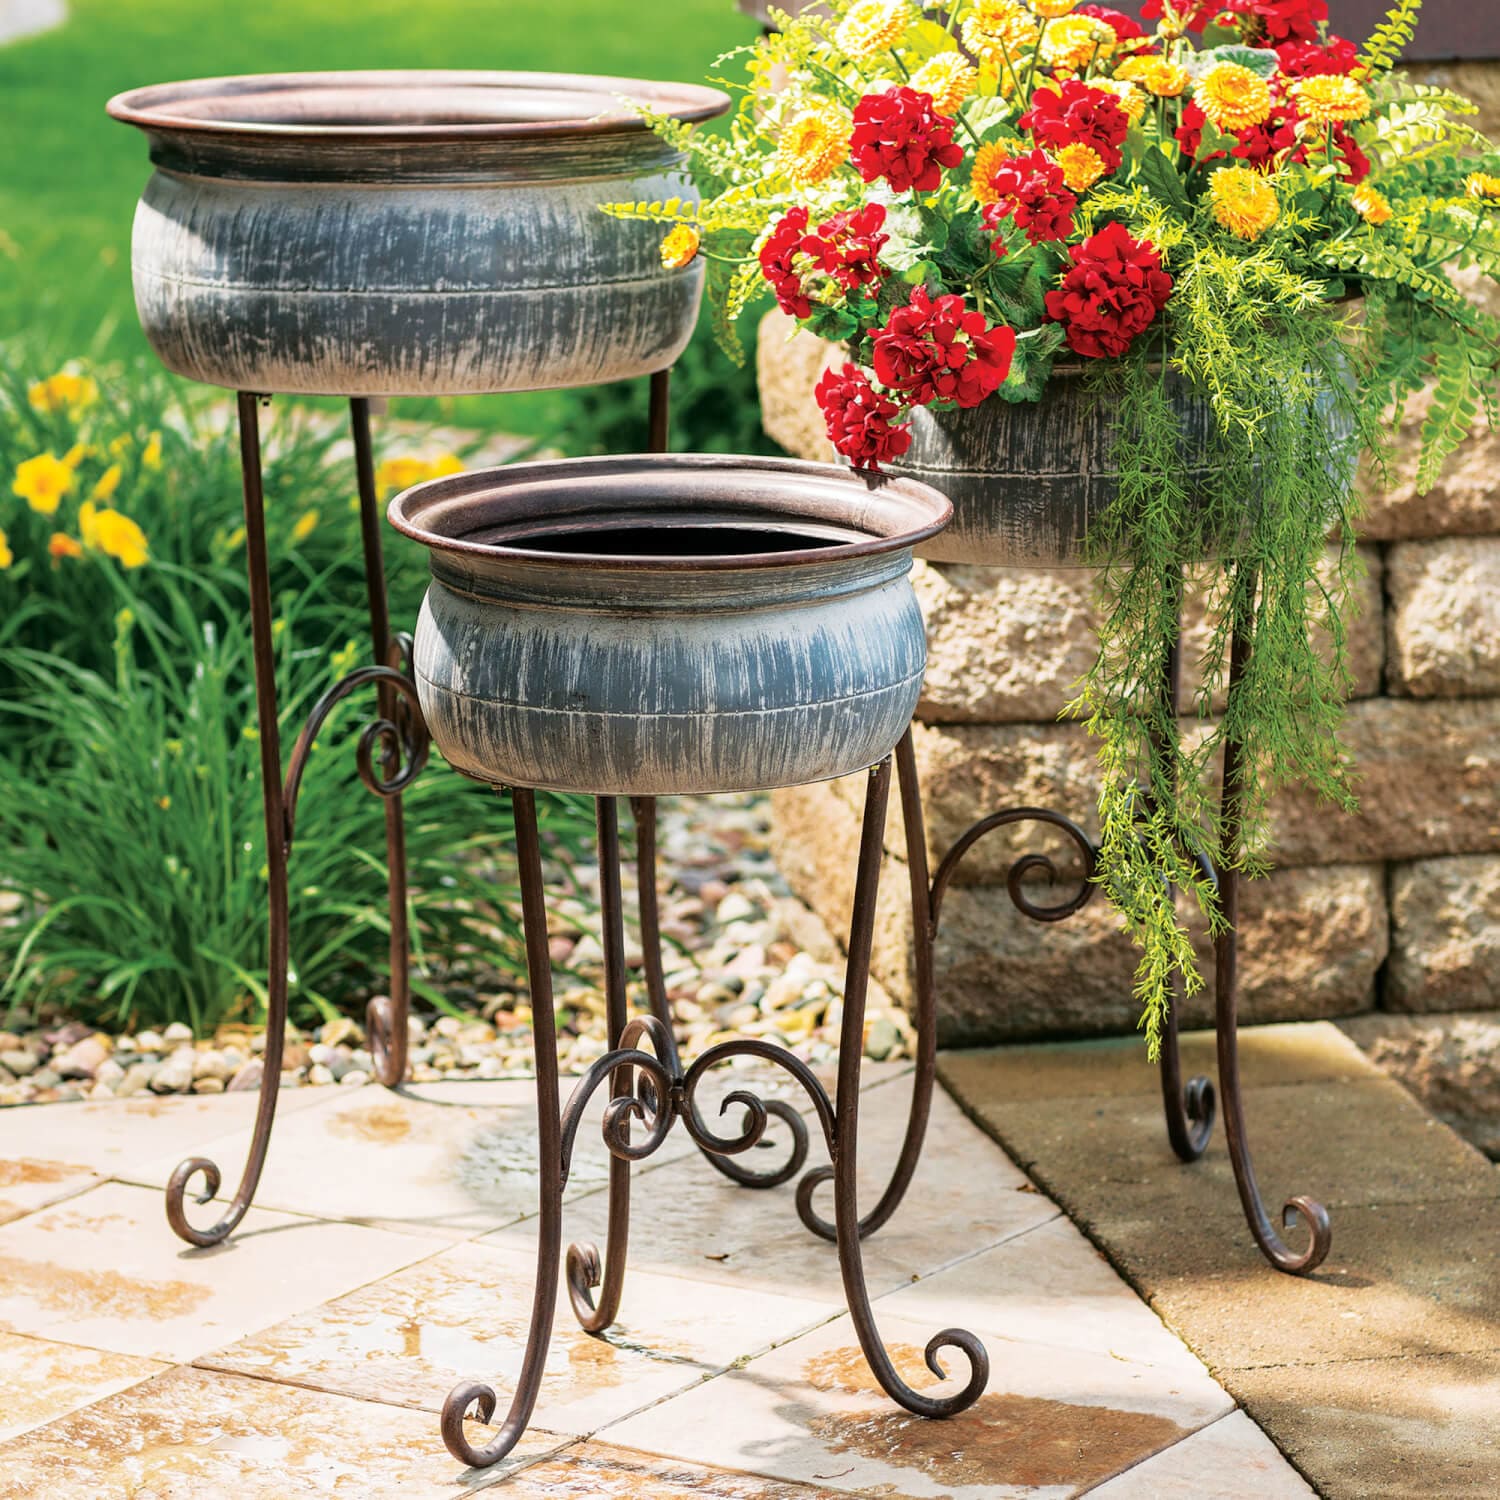 Vintage Bowl Planters On Stand Elevate Home Decor - Outdoors